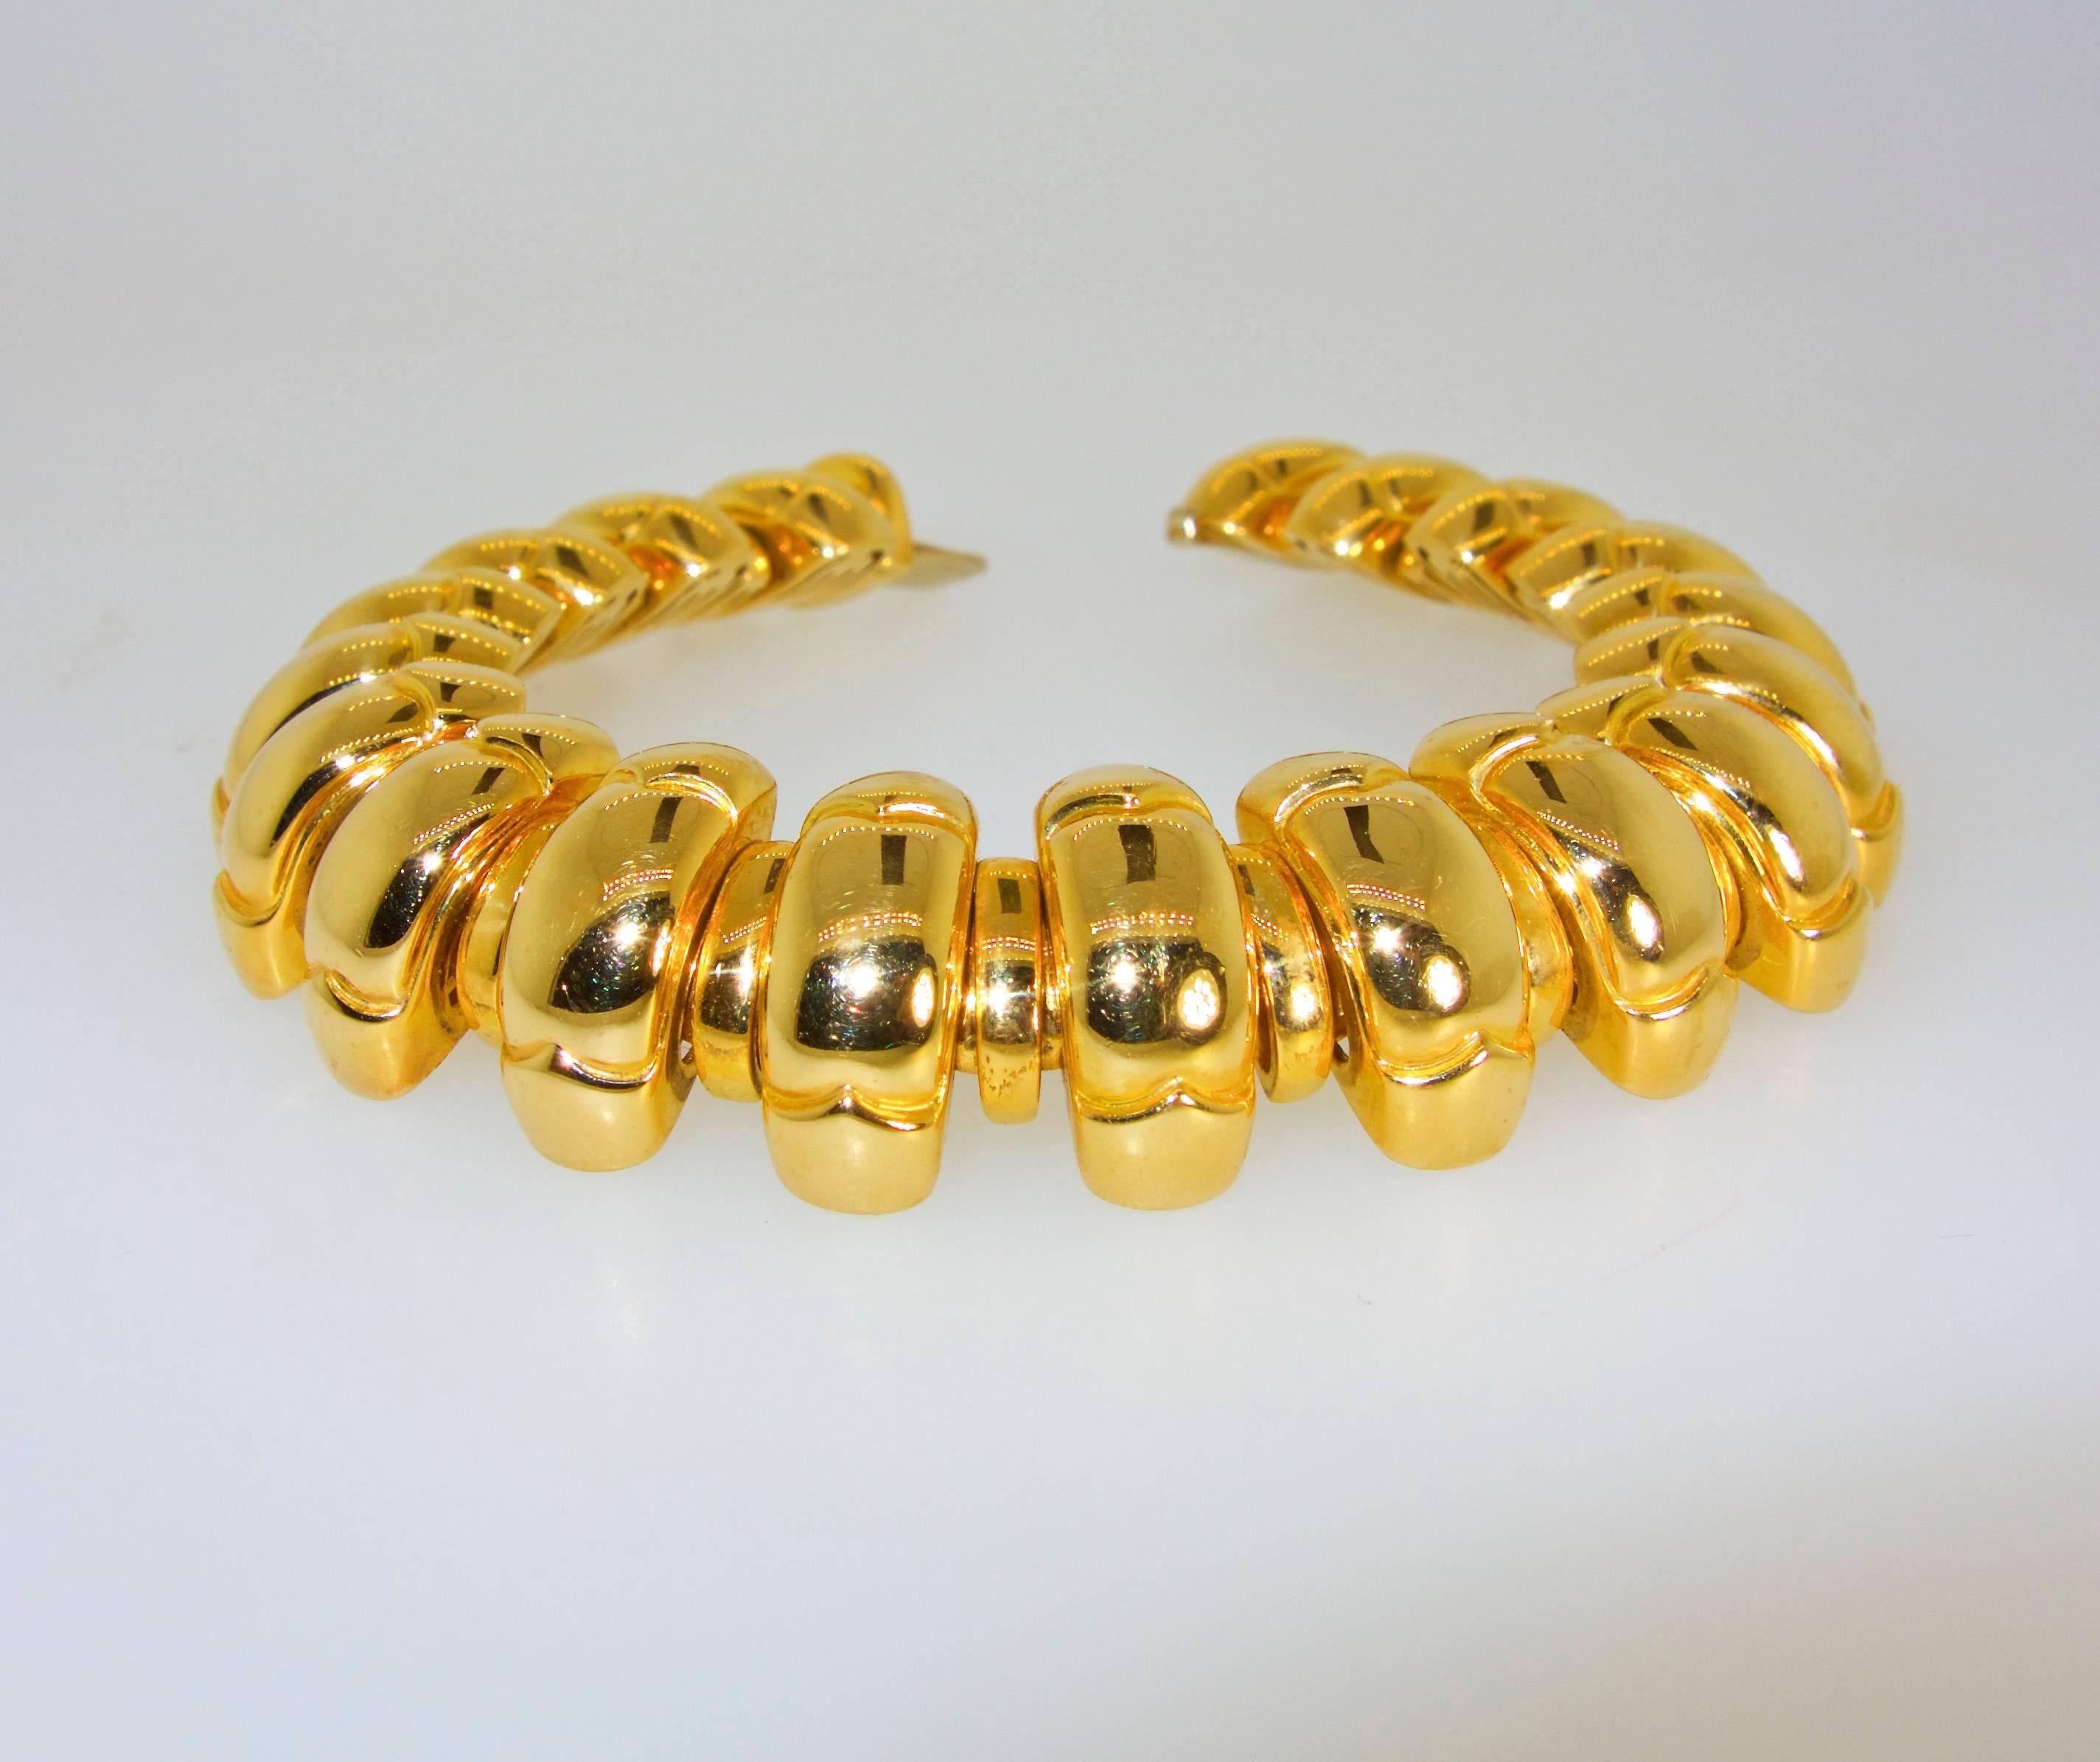 18K yellow gold, 76.52 grams.  Substantial quality, a classic link by the famous house of Bulgari.  Signed and numbered, this bracelet is 7.25 inches long